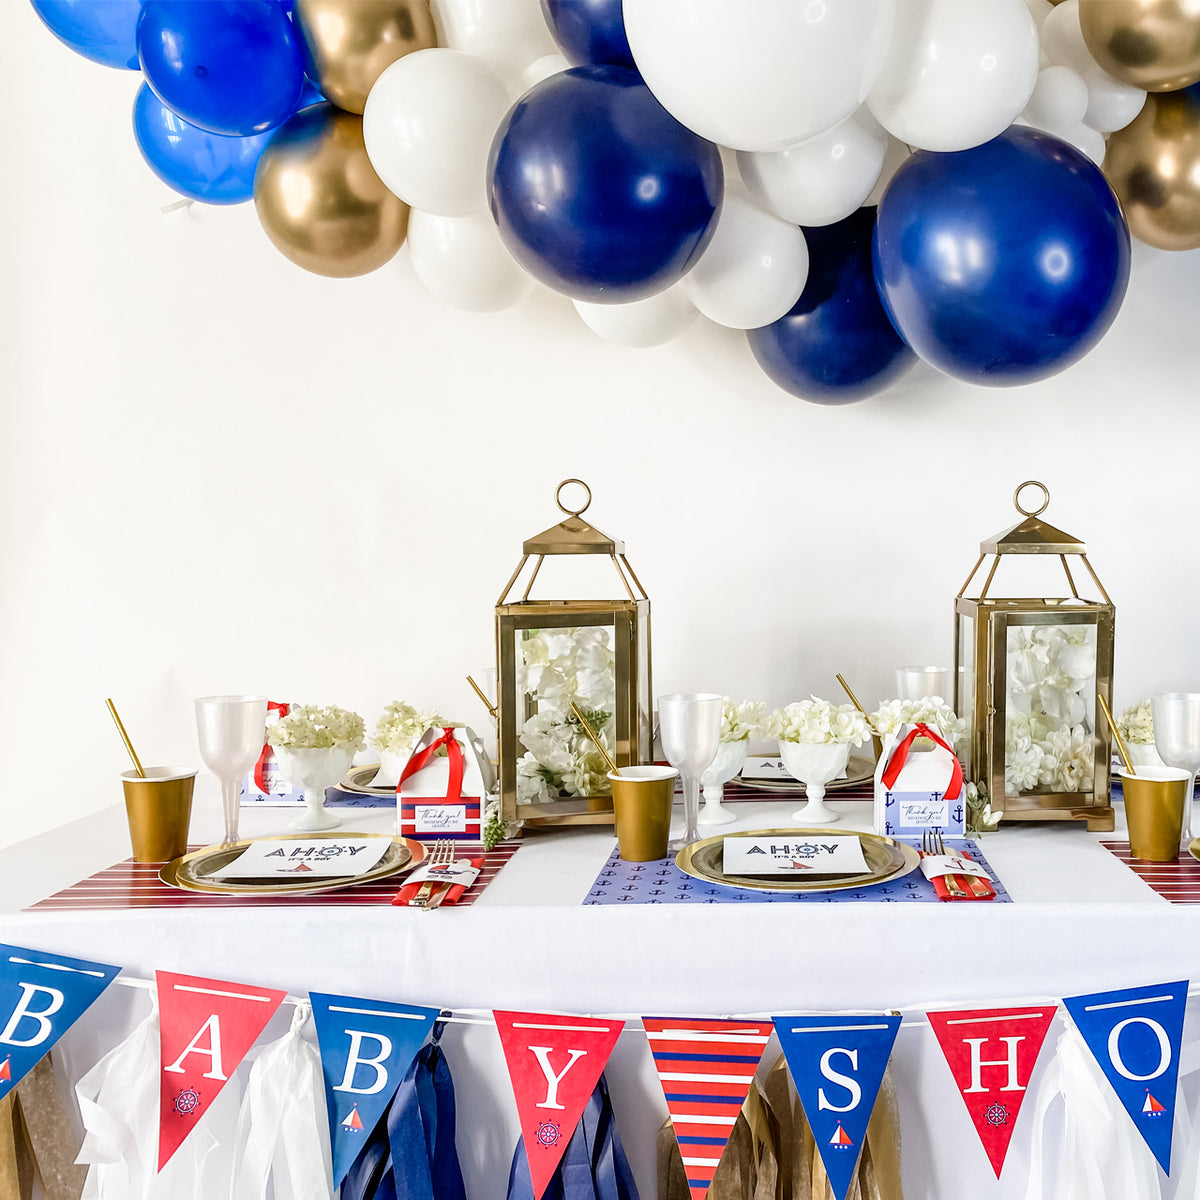 AHOY - IT'S A BOY NAUTICAL BABY SHOWER – Luluthia Party Boîte